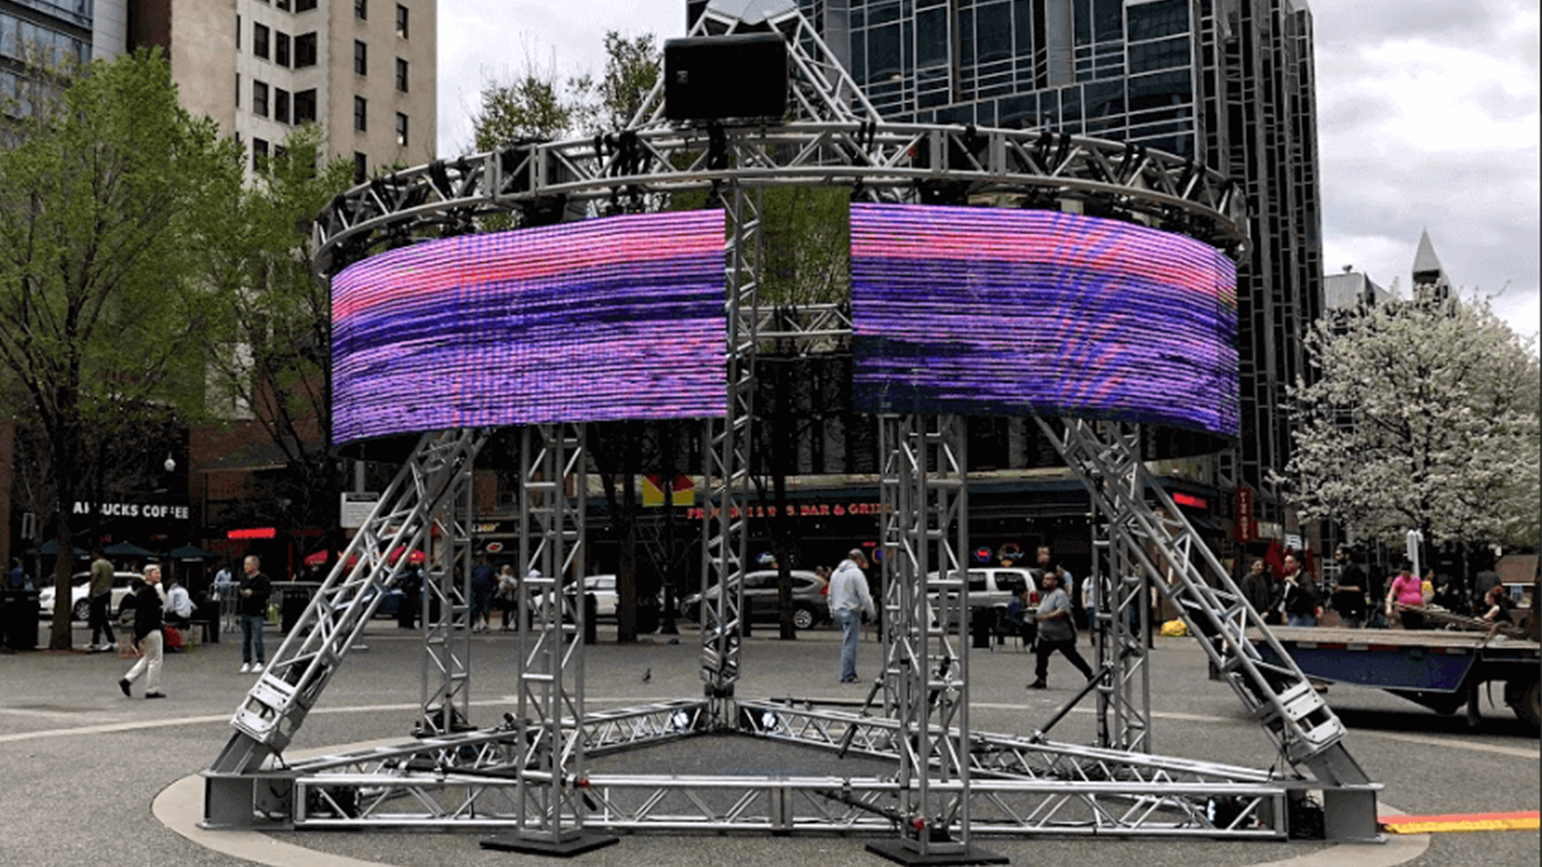 Image of circular video screens on a pyramid structure installed in a the middle of a public square